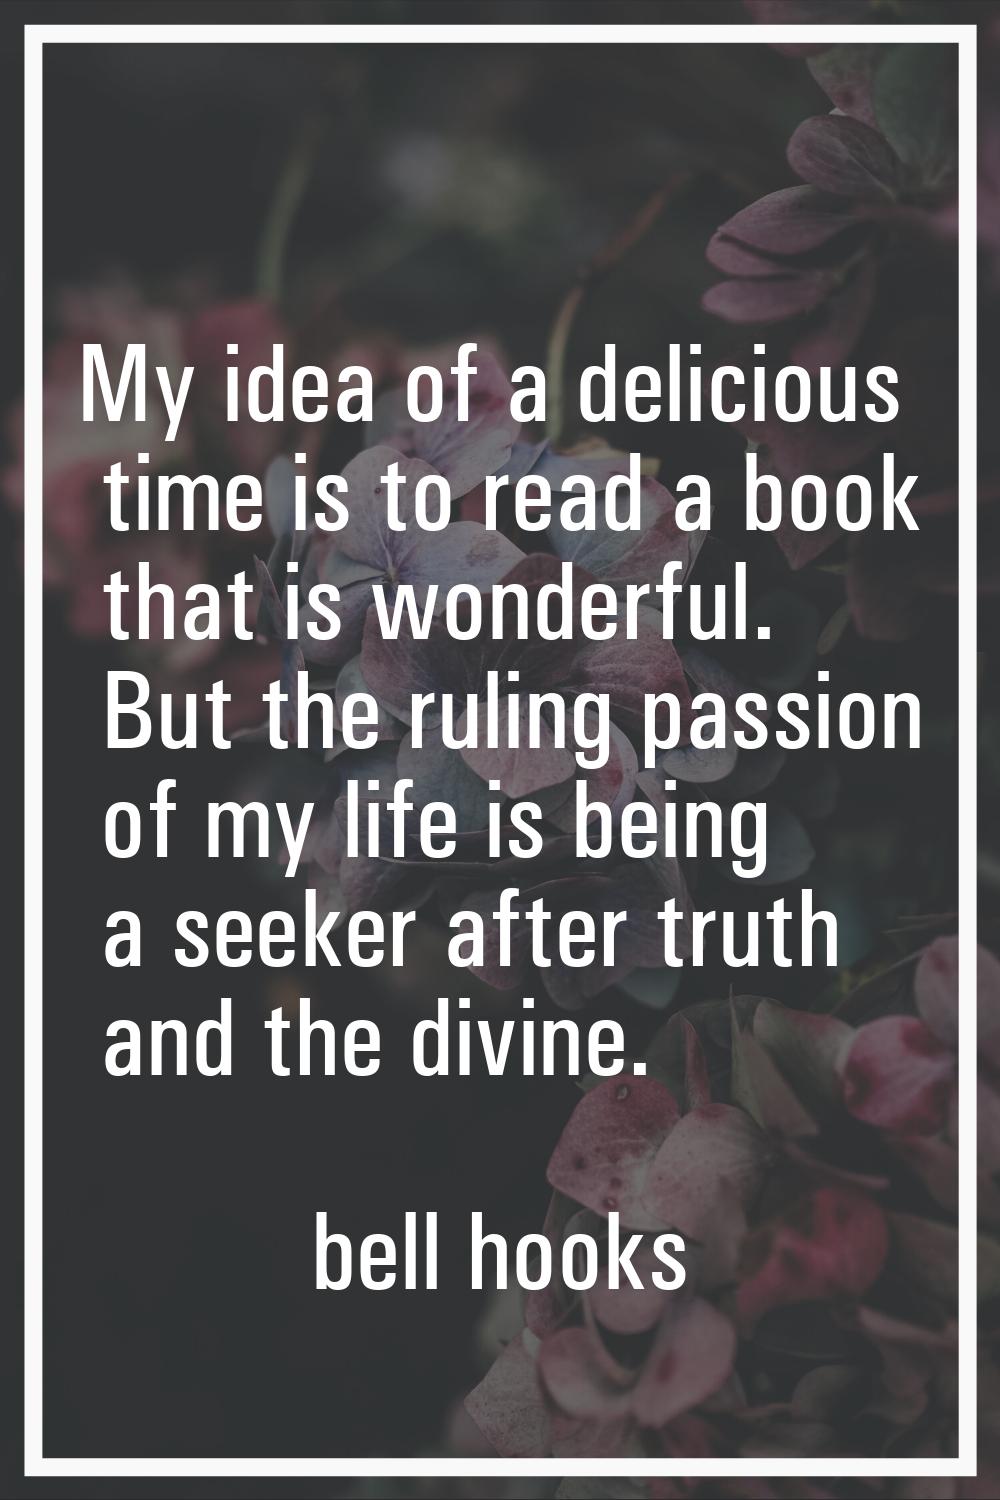 My idea of a delicious time is to read a book that is wonderful. But the ruling passion of my life 